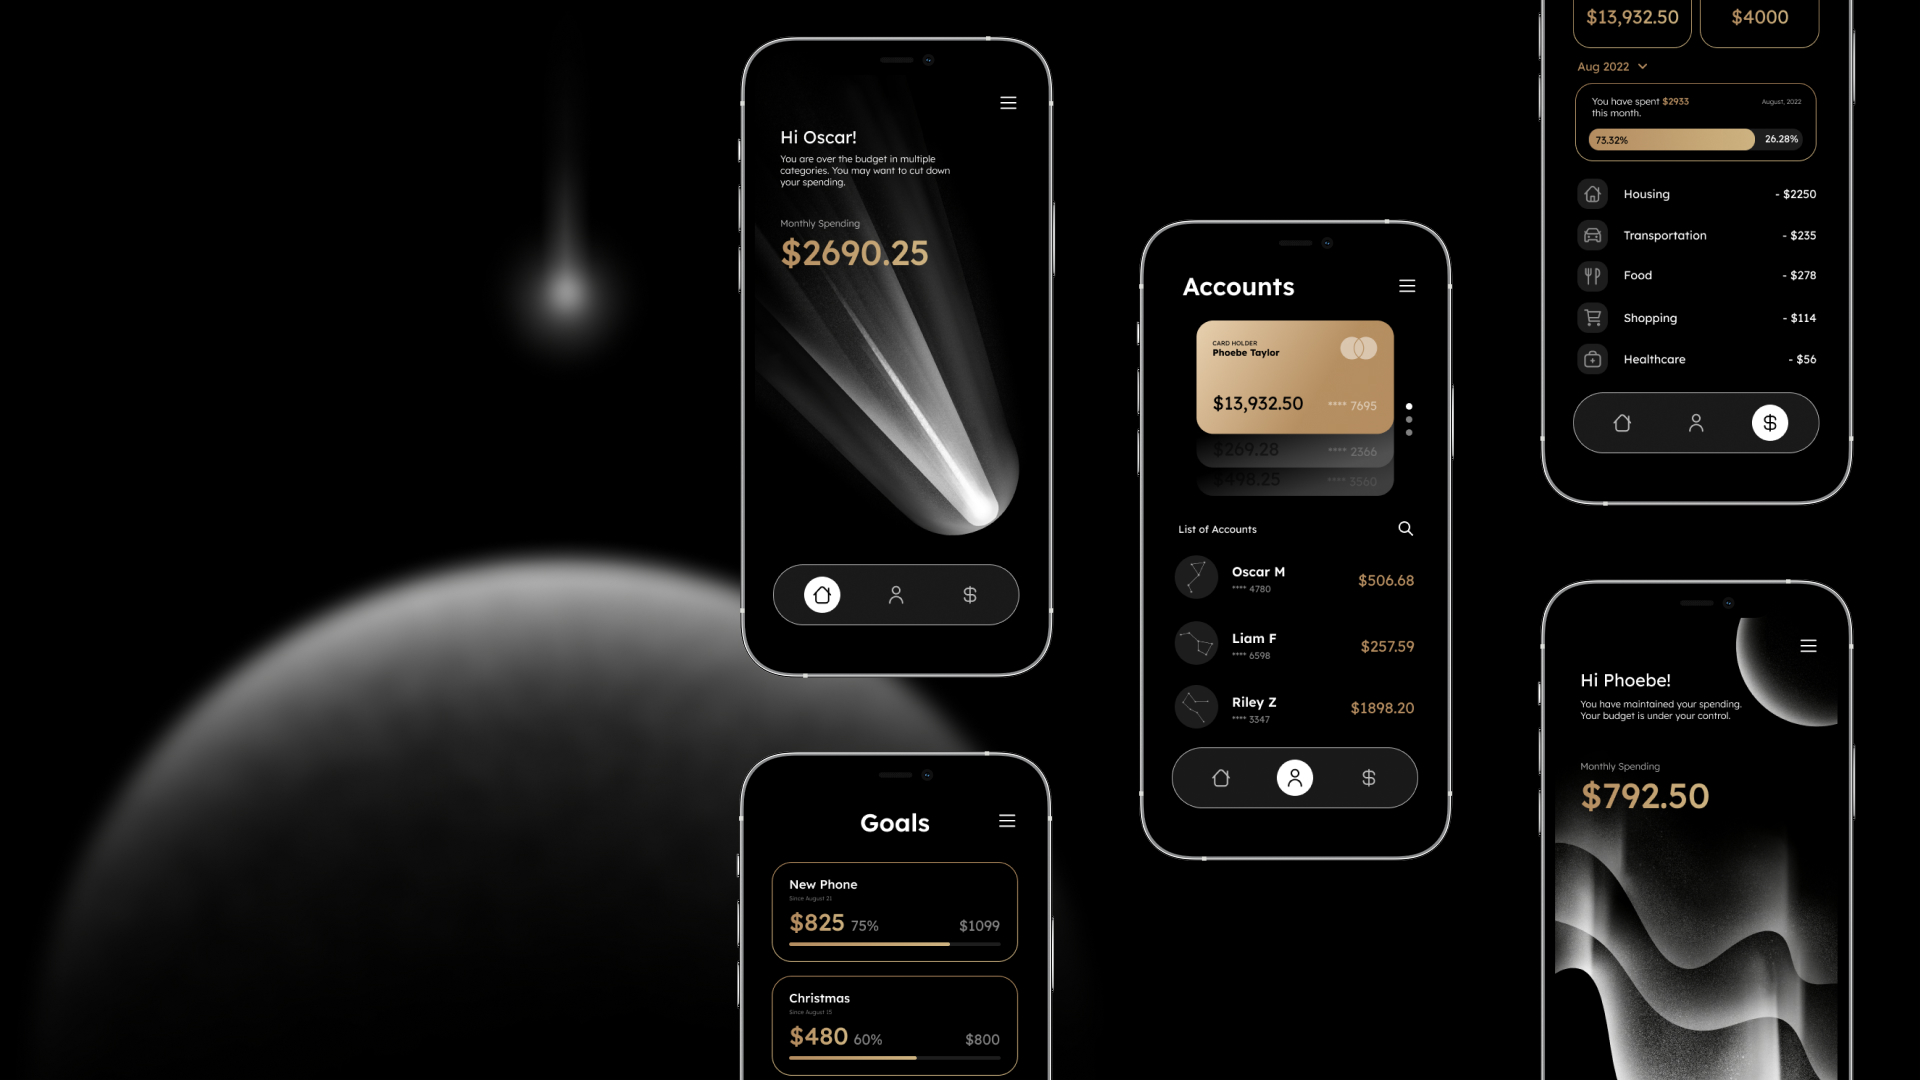 iPhone screens of a fintech app with a meteor illustration as the background.